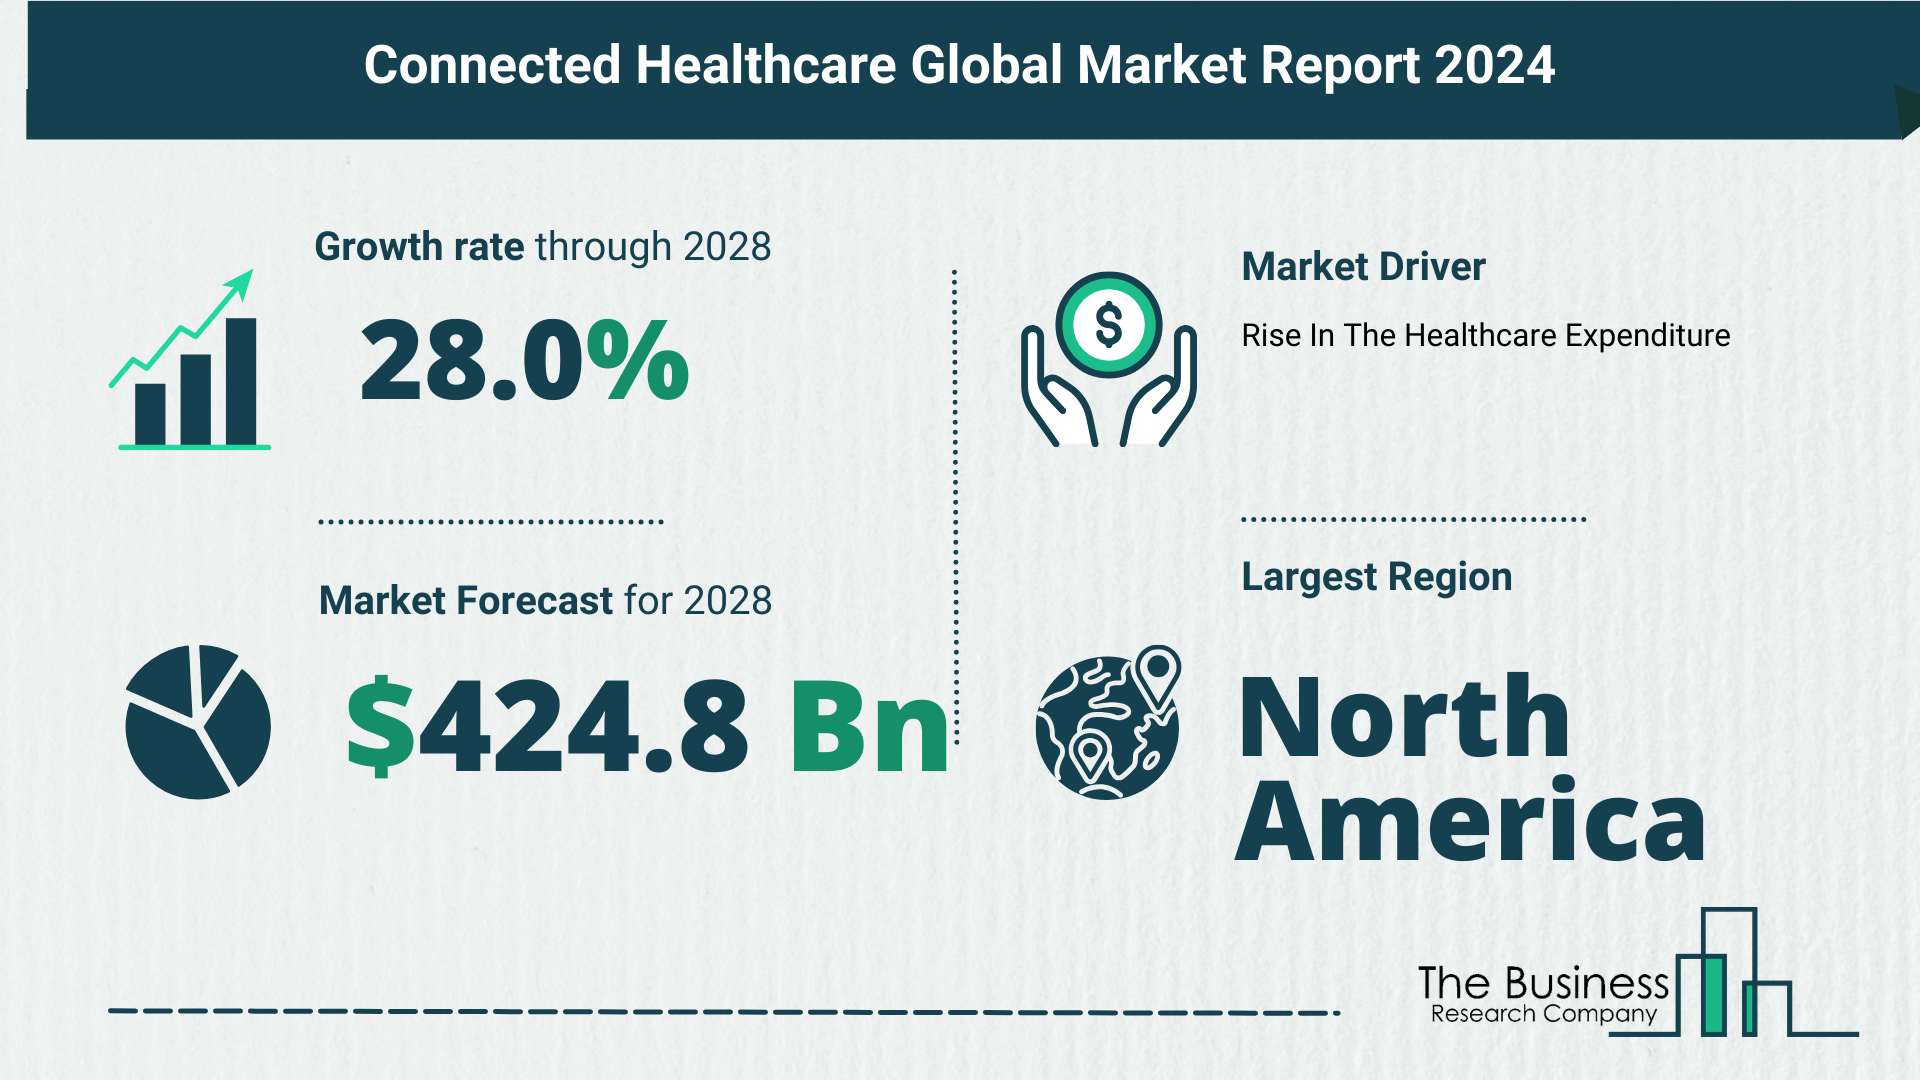 Key Trends And Drivers In The Connected Healthcare Market 2024